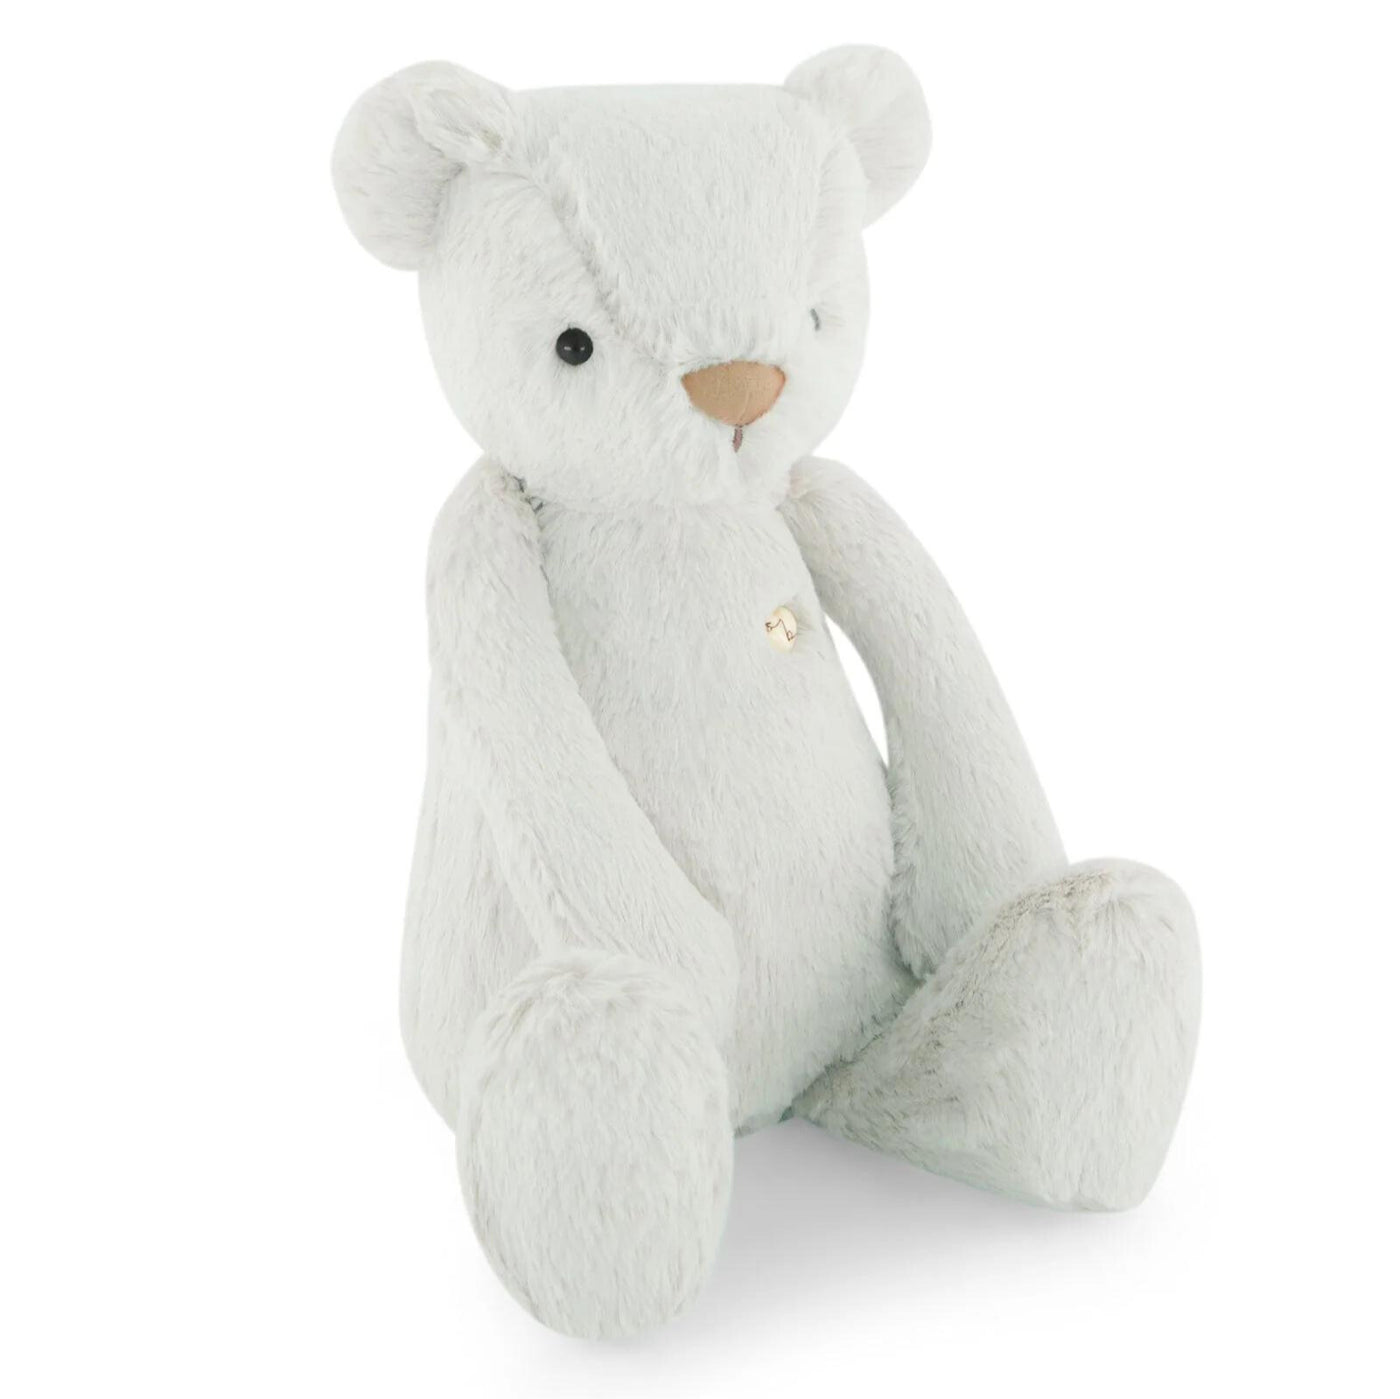 Snuggle Bunnies - George the Bear  | Willow